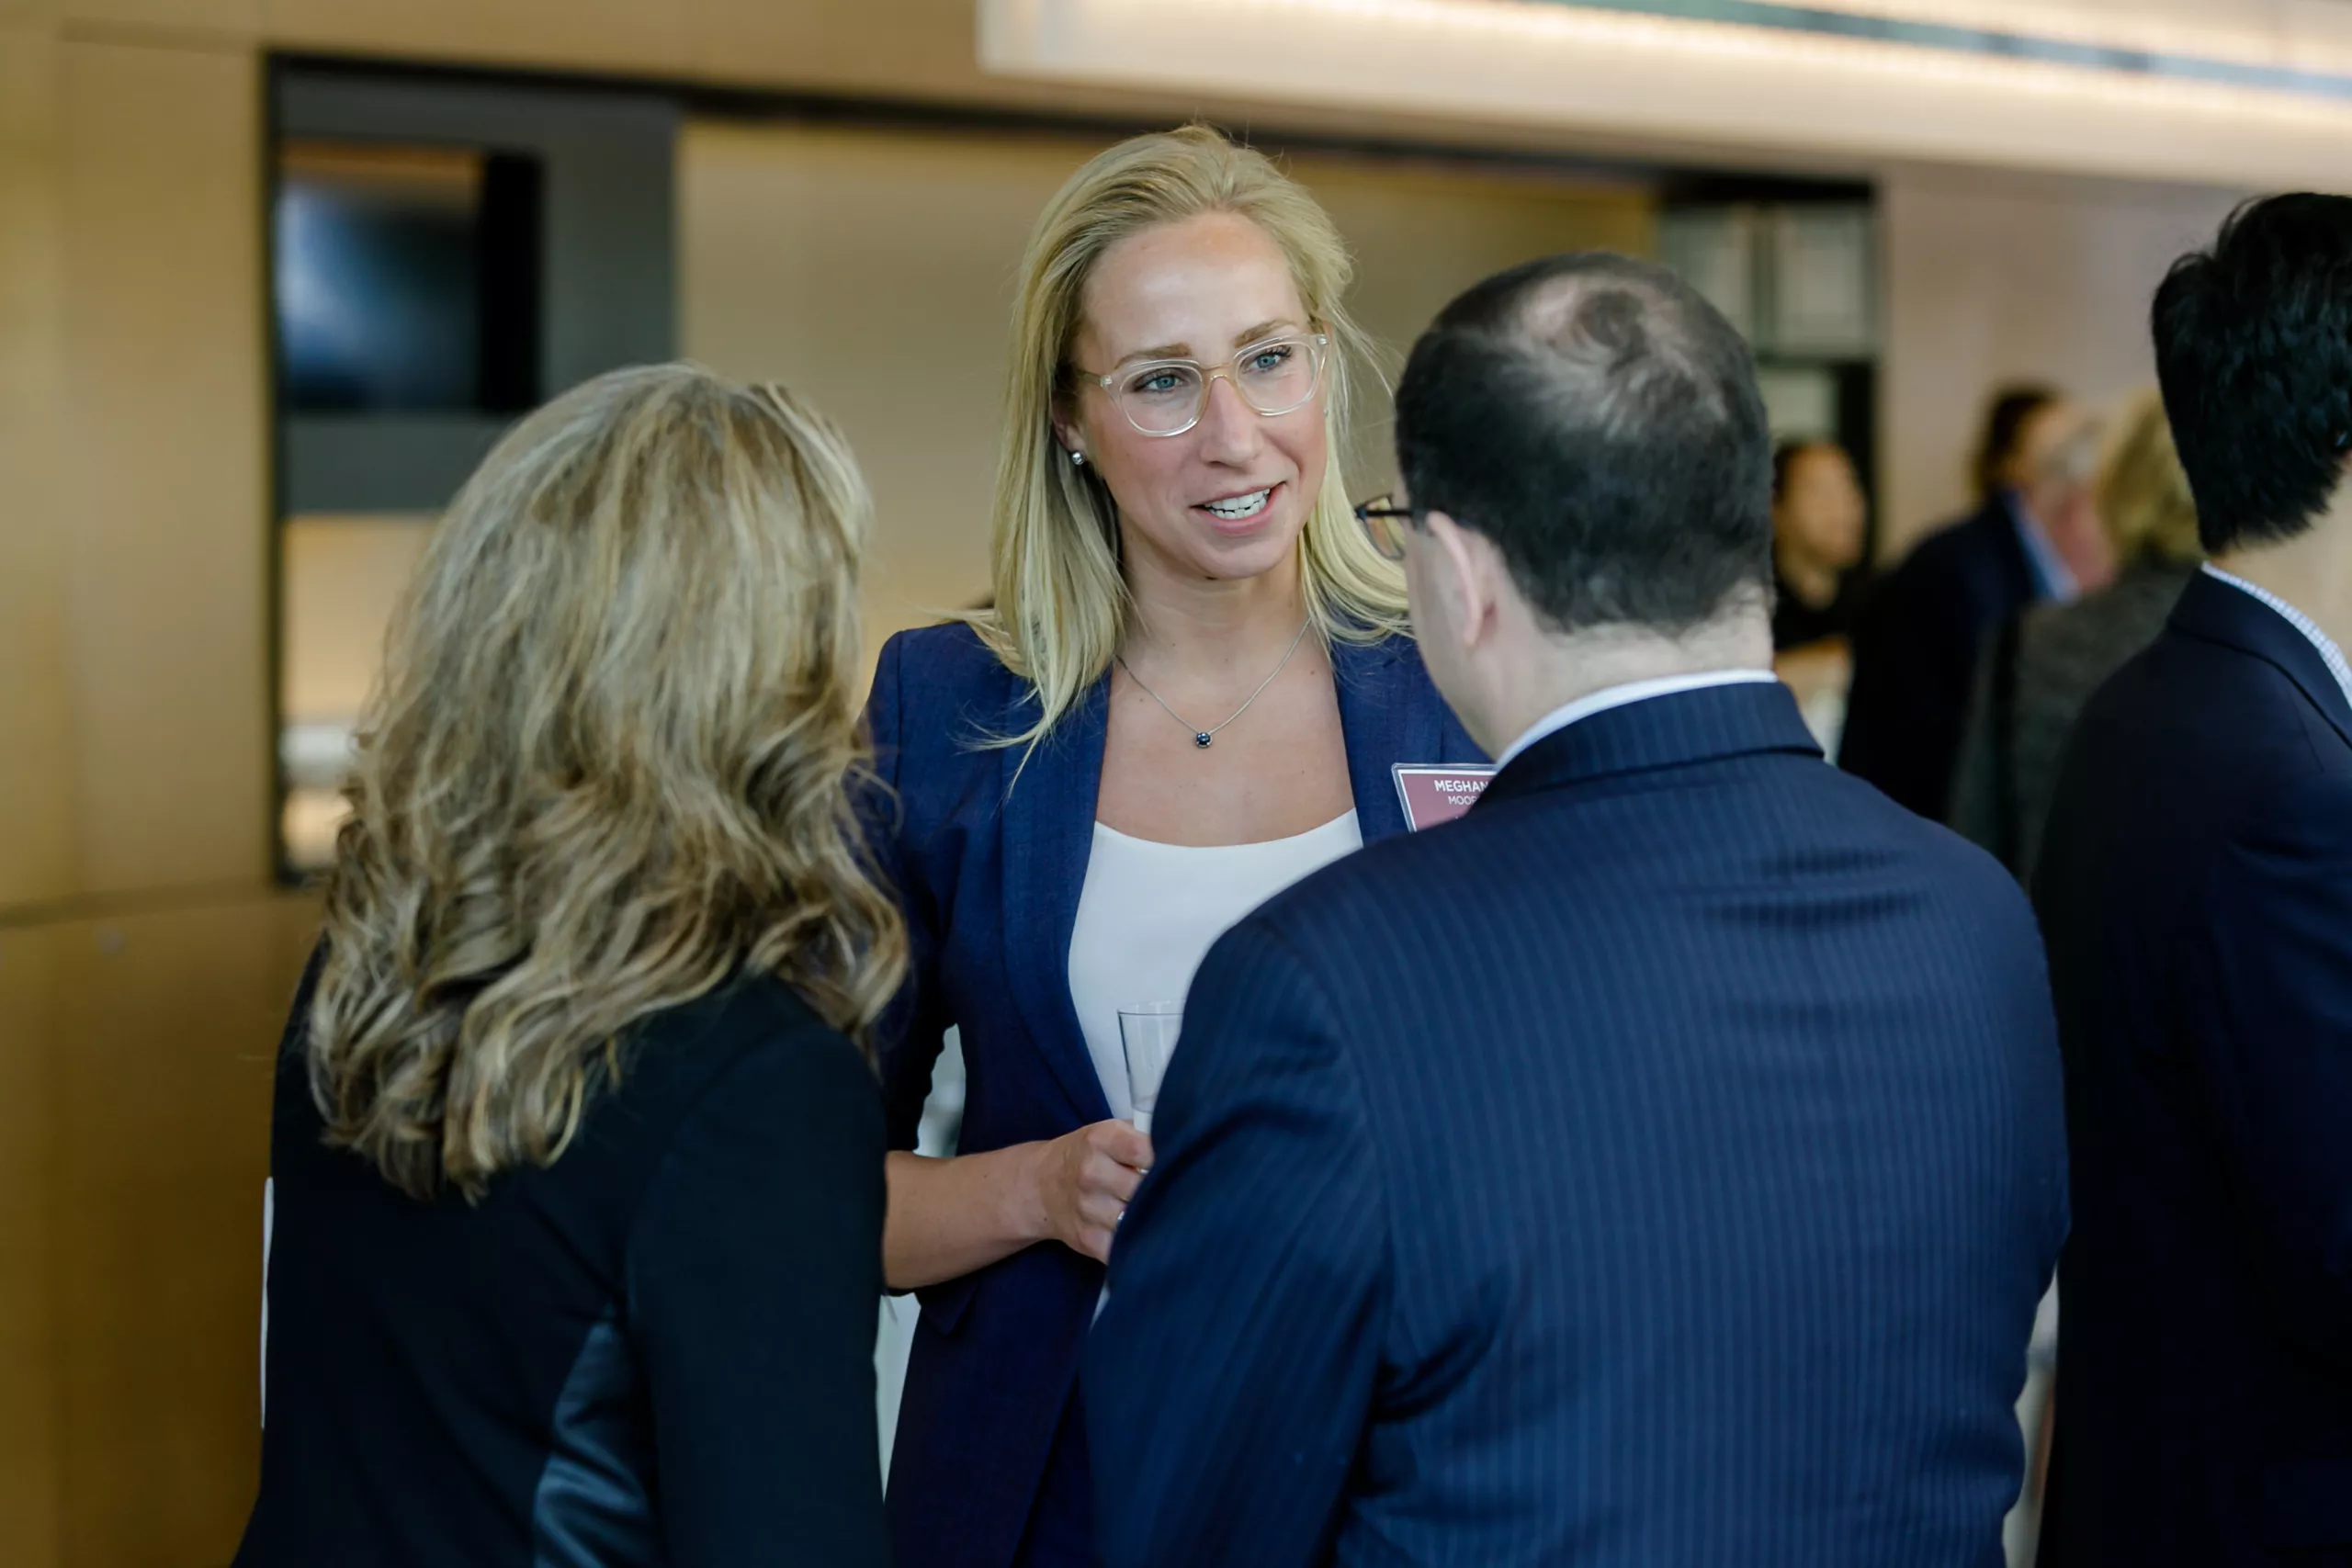 Meghan Moore speaks with clients at the Burgundy Forum